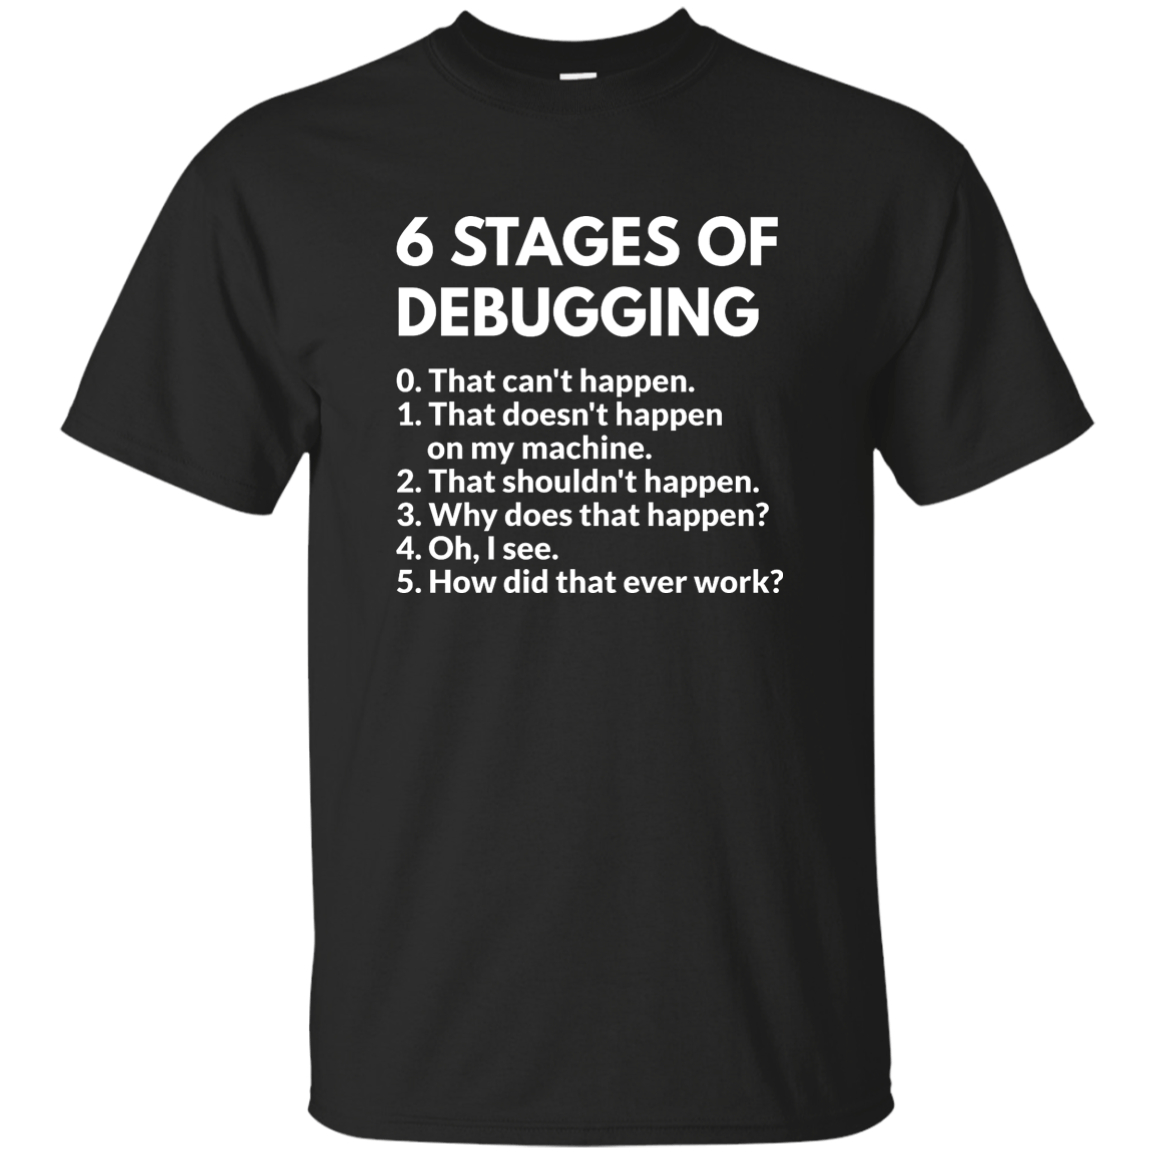 6 Stages of Debugging